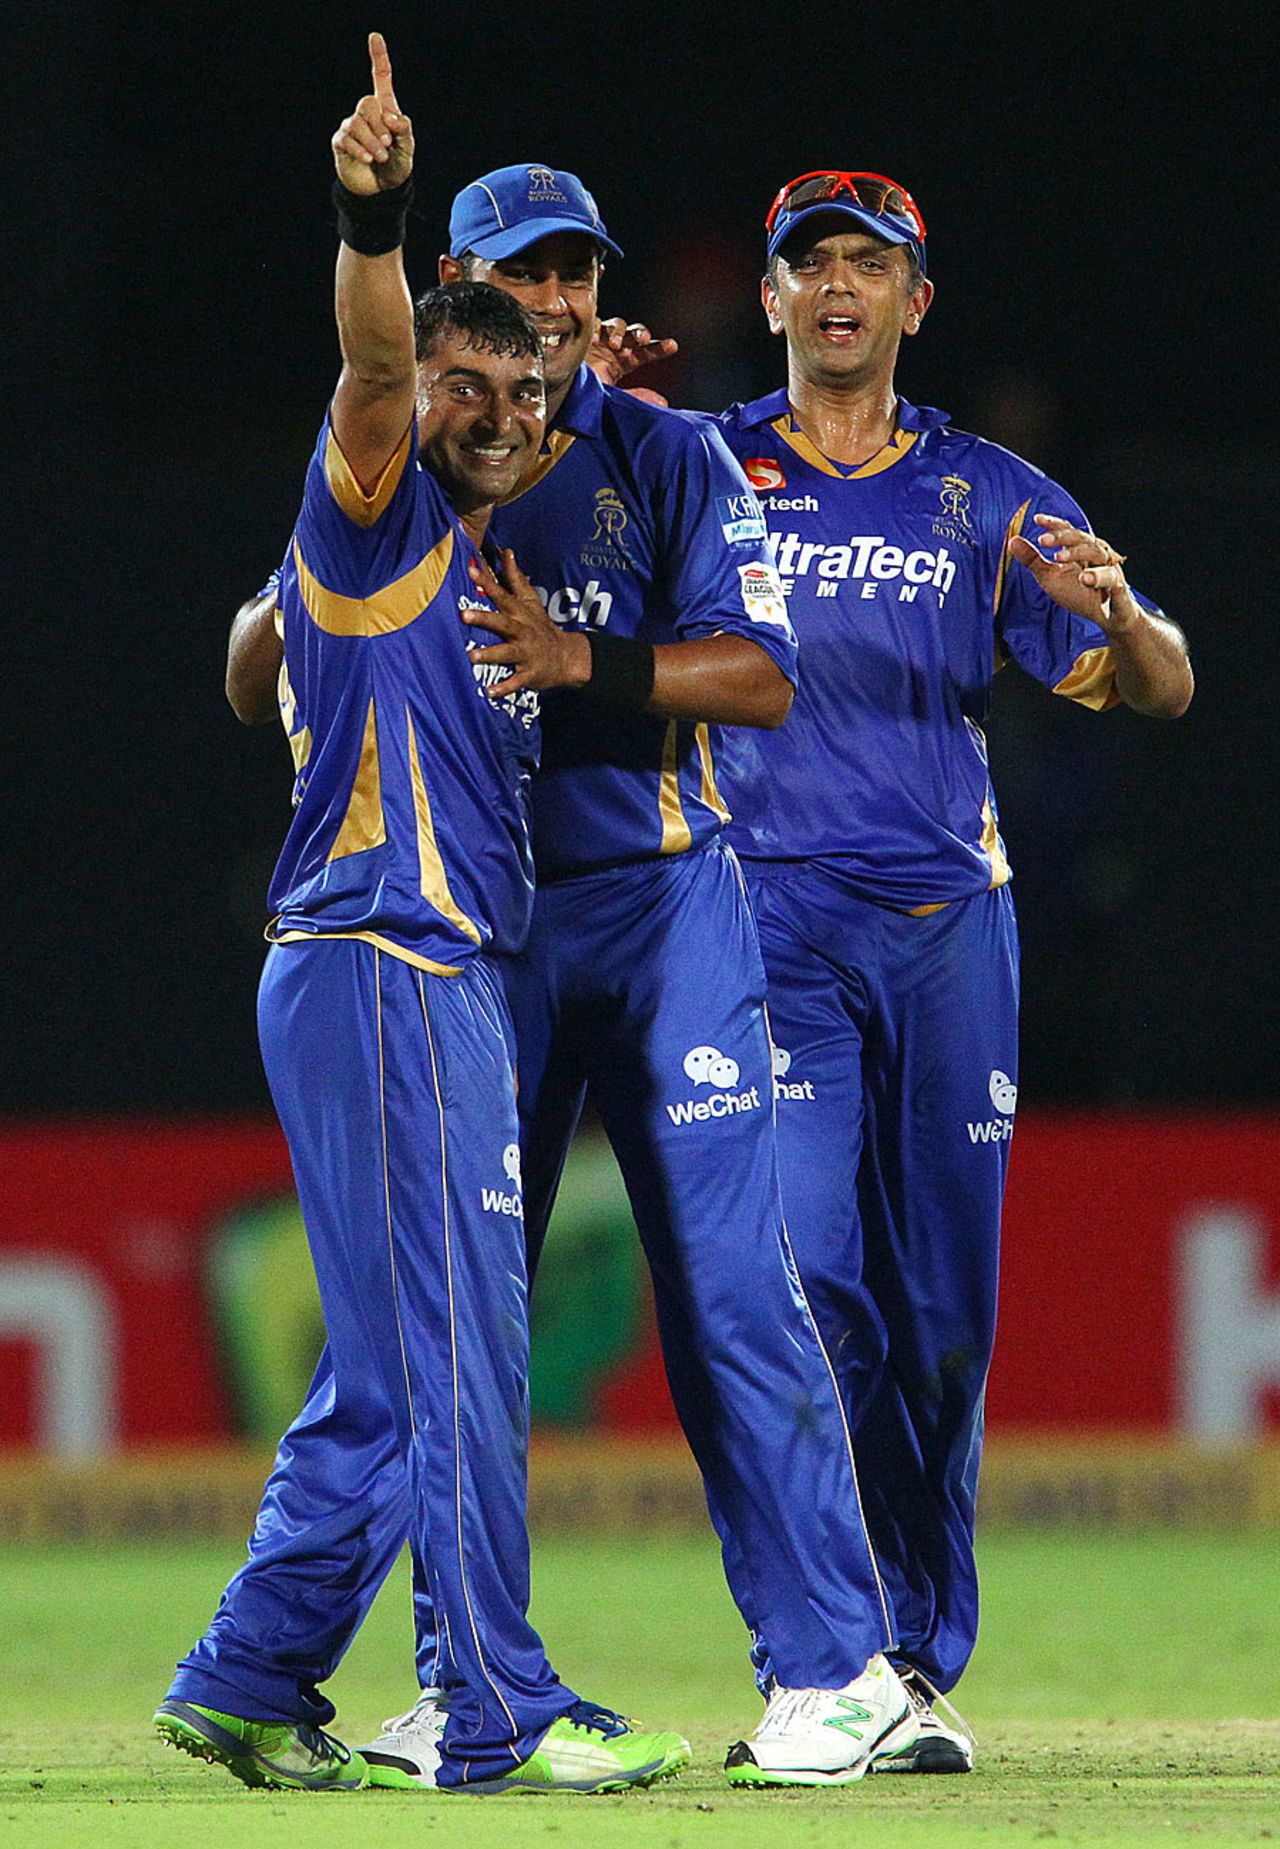 Pravin Tambe is the center of attention, Lions v Rajasthan Royals, Group A, Champions League 2013, Jaipur, September 25, 2013